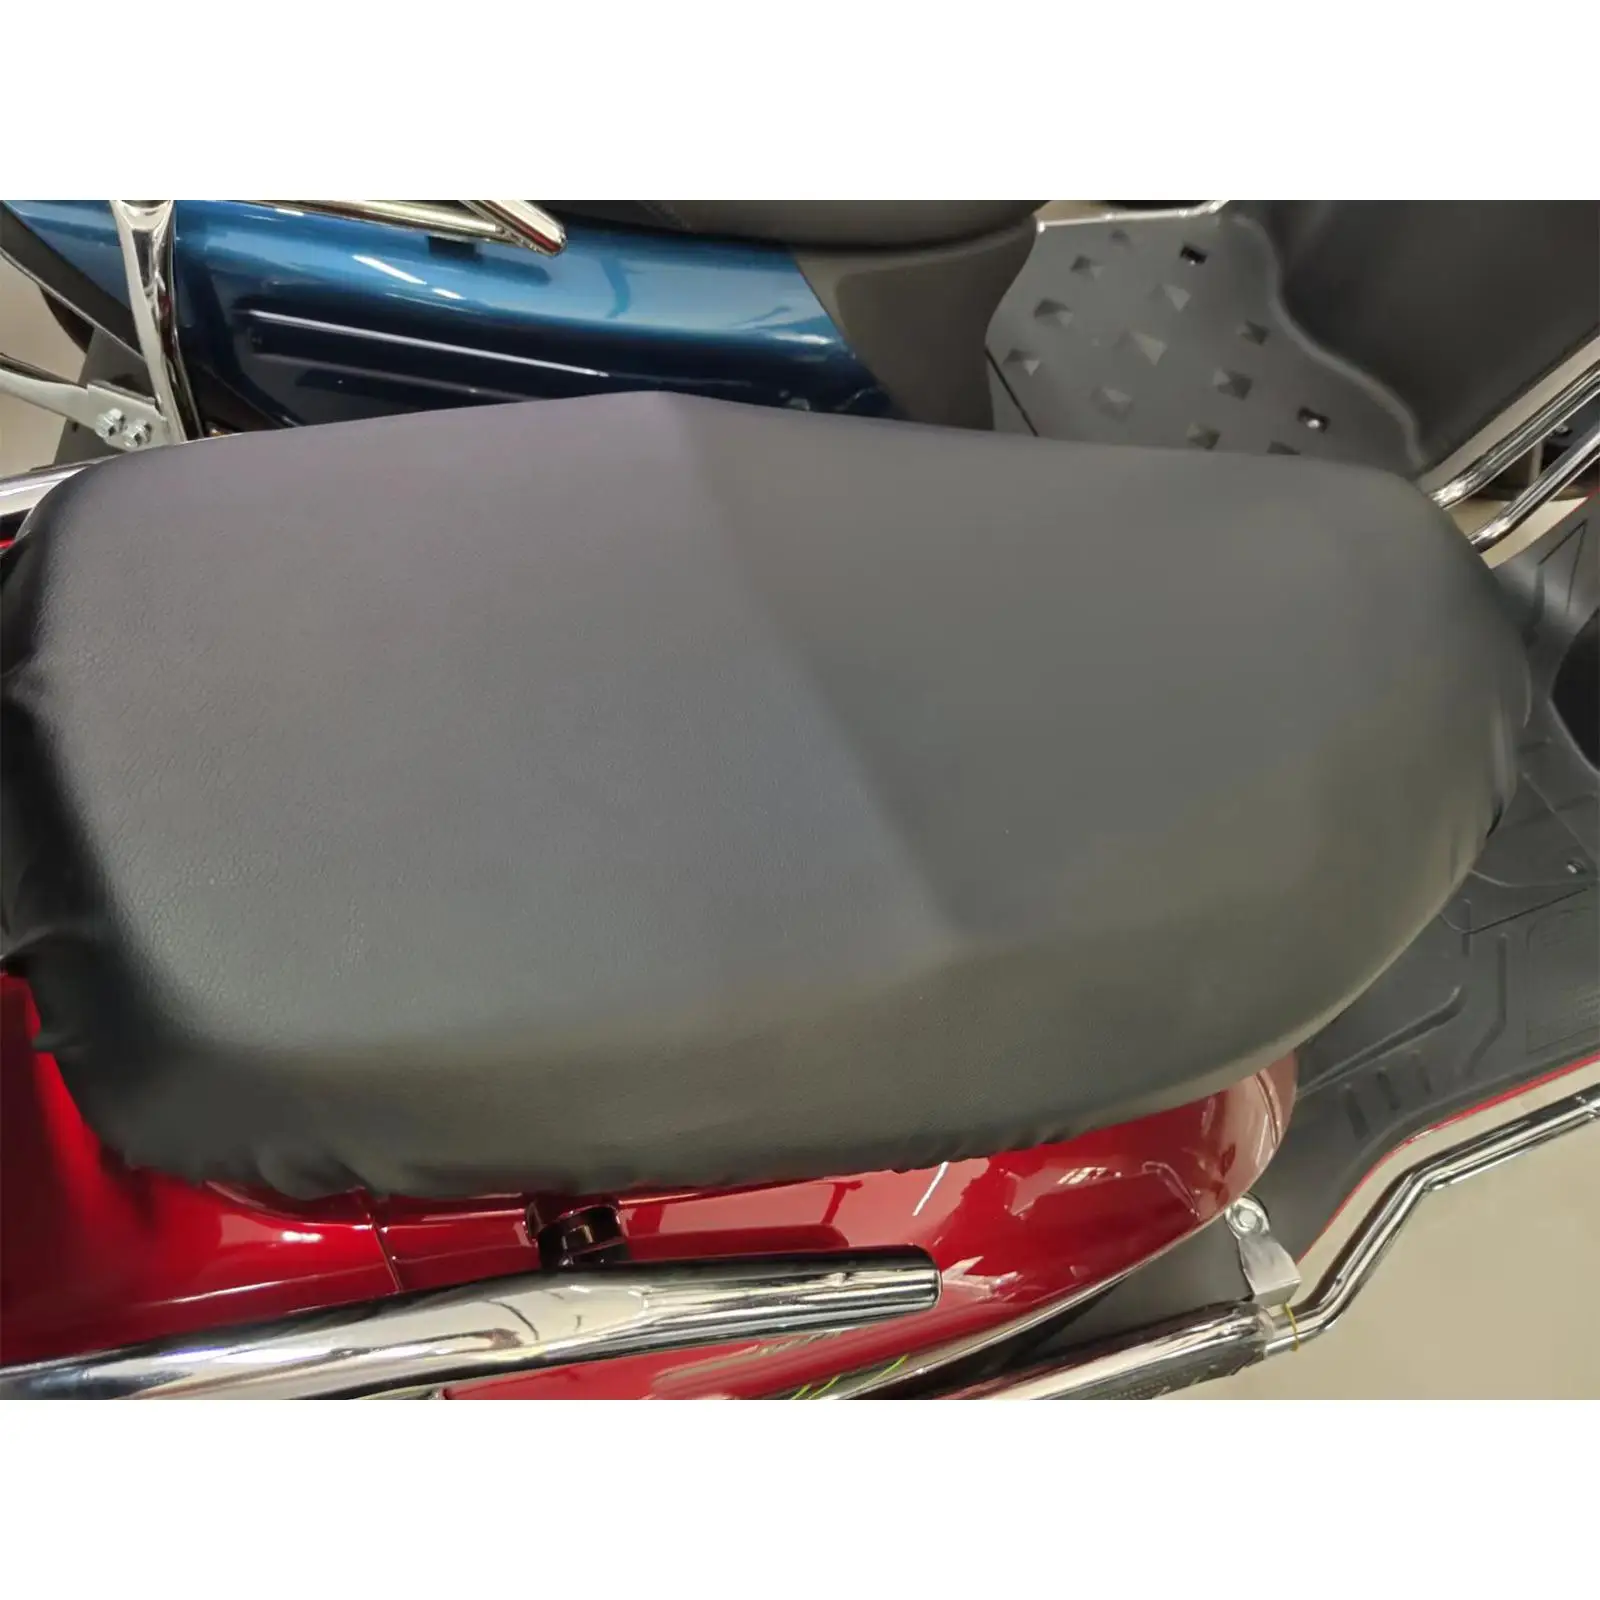 Elastic Motorcycle Seat Cushion Cover Comfortable Dustproof Flexible Nonslip Seat Protector for Motorcycle Moped Accessories